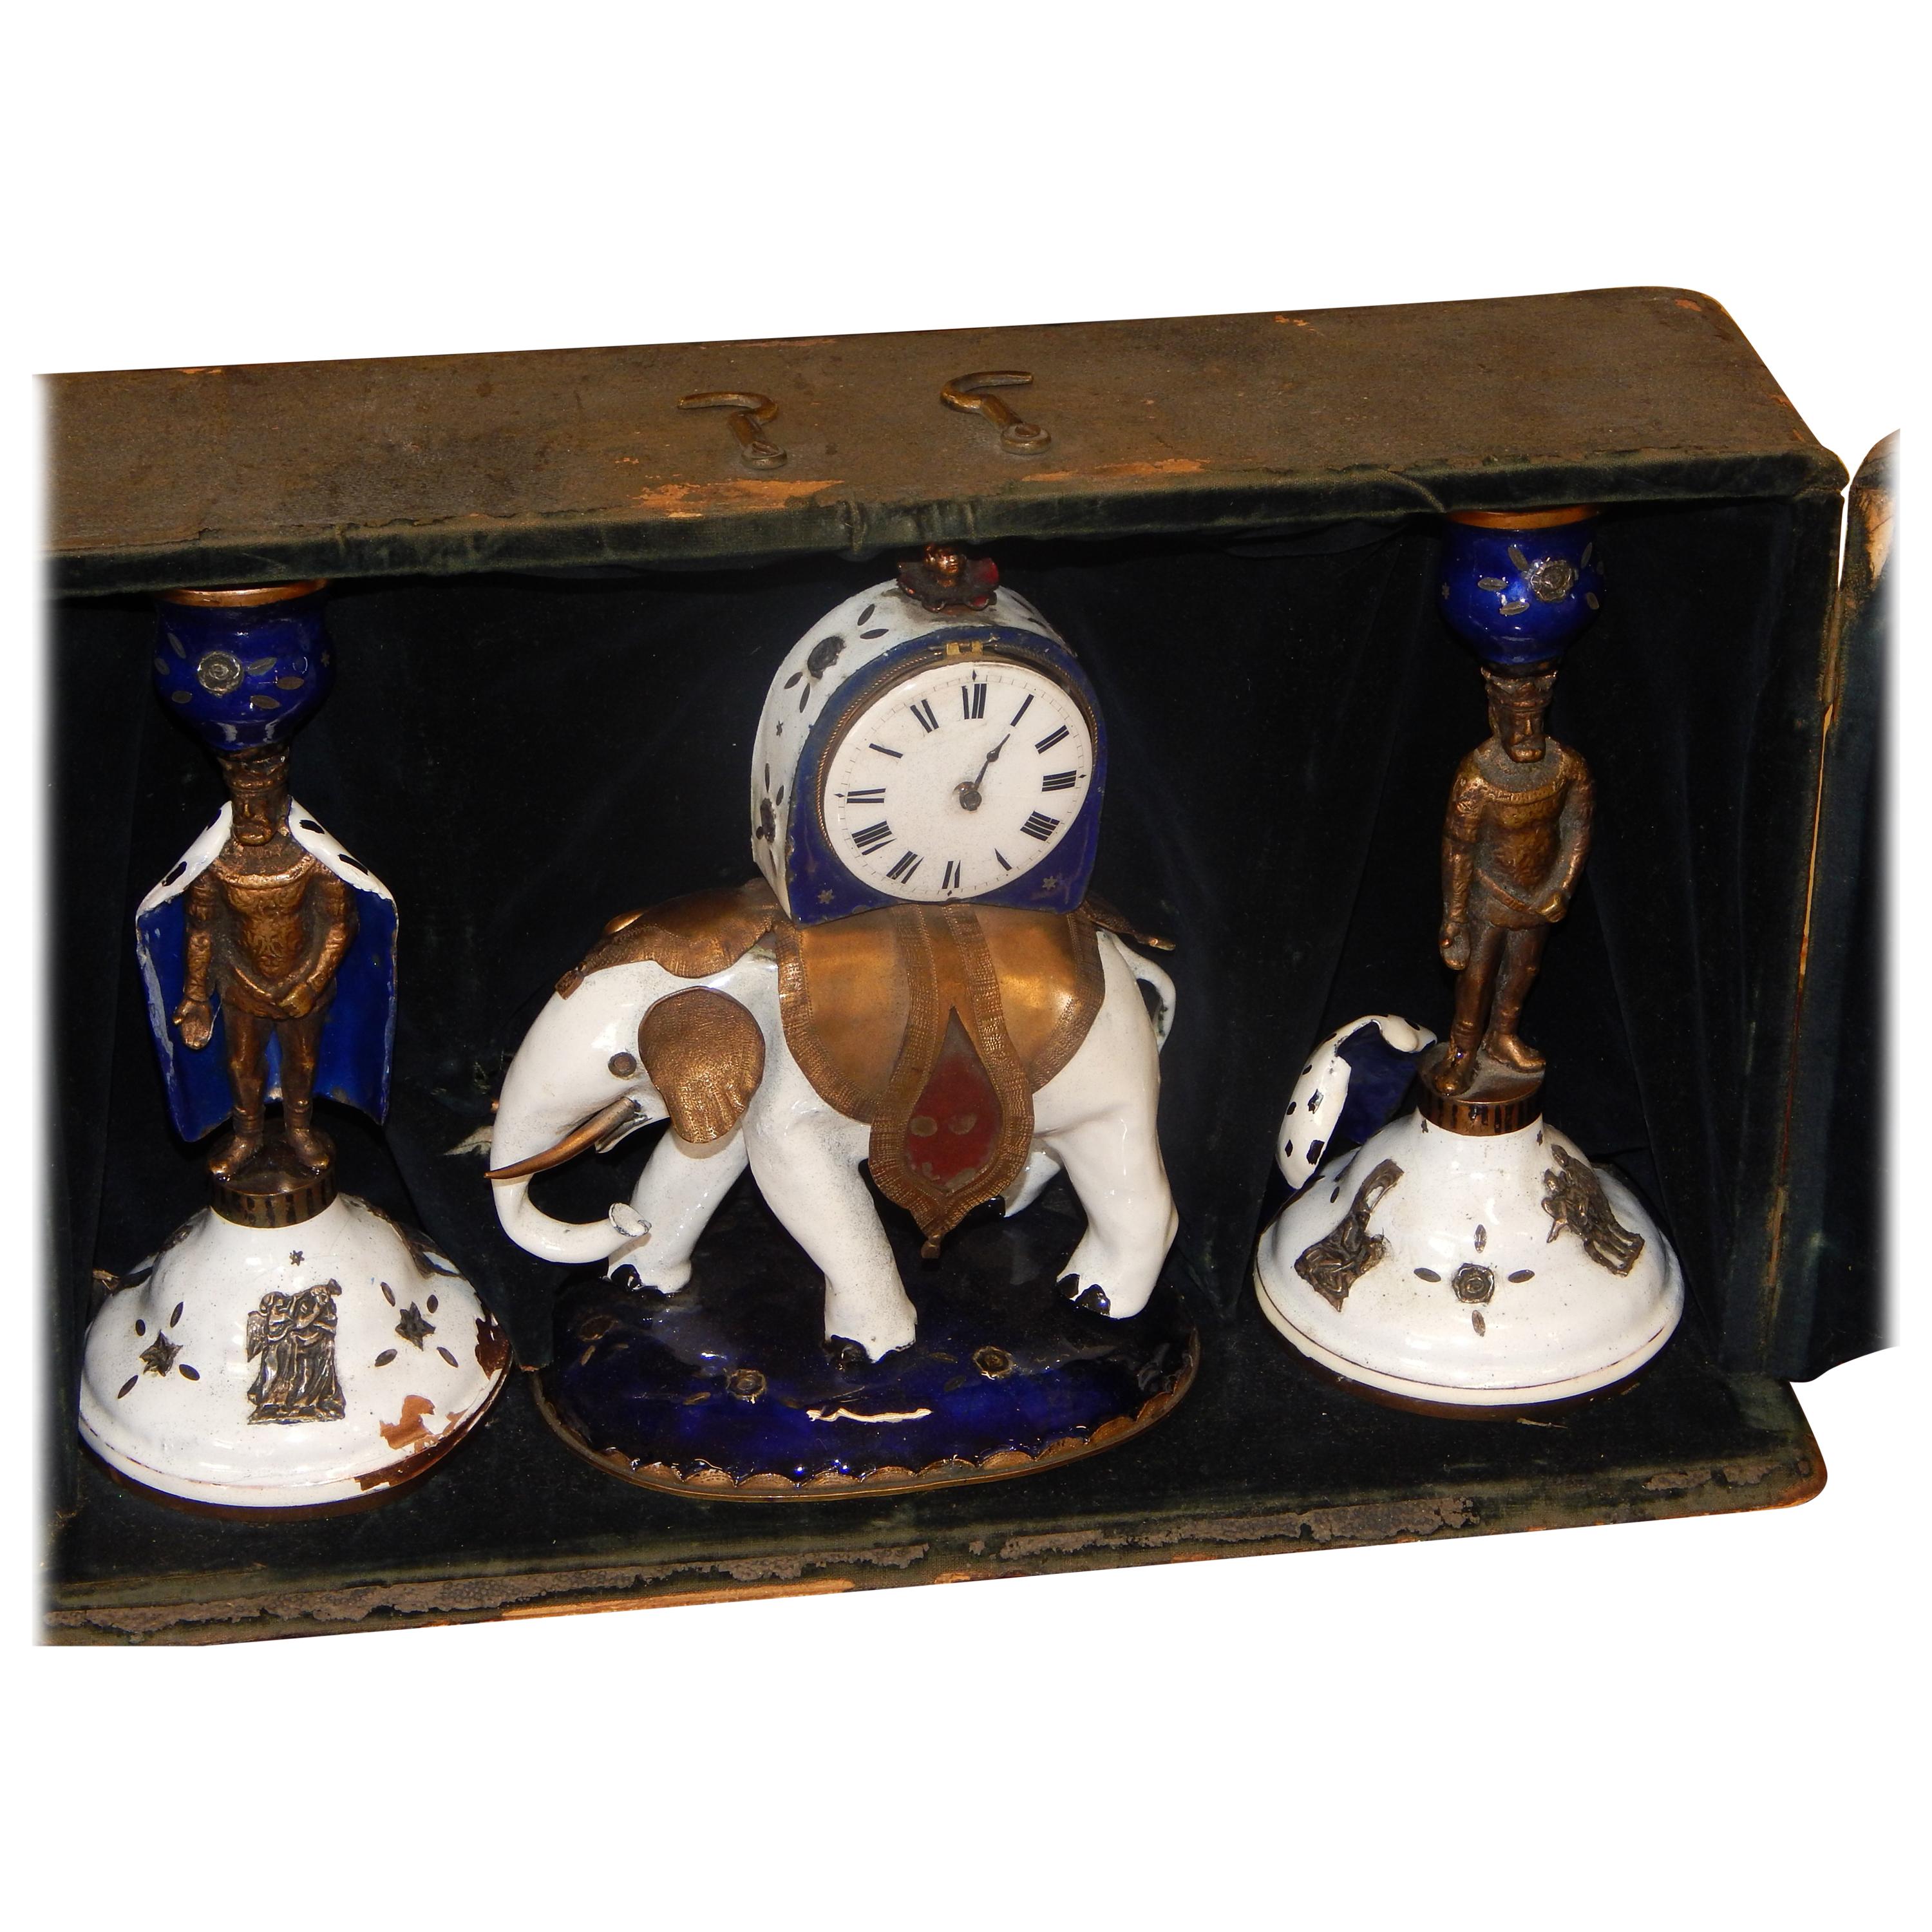 Extremely Rare Enameled Three-Piece Clock Set by "Lormier" with Travel Case 1810 For Sale